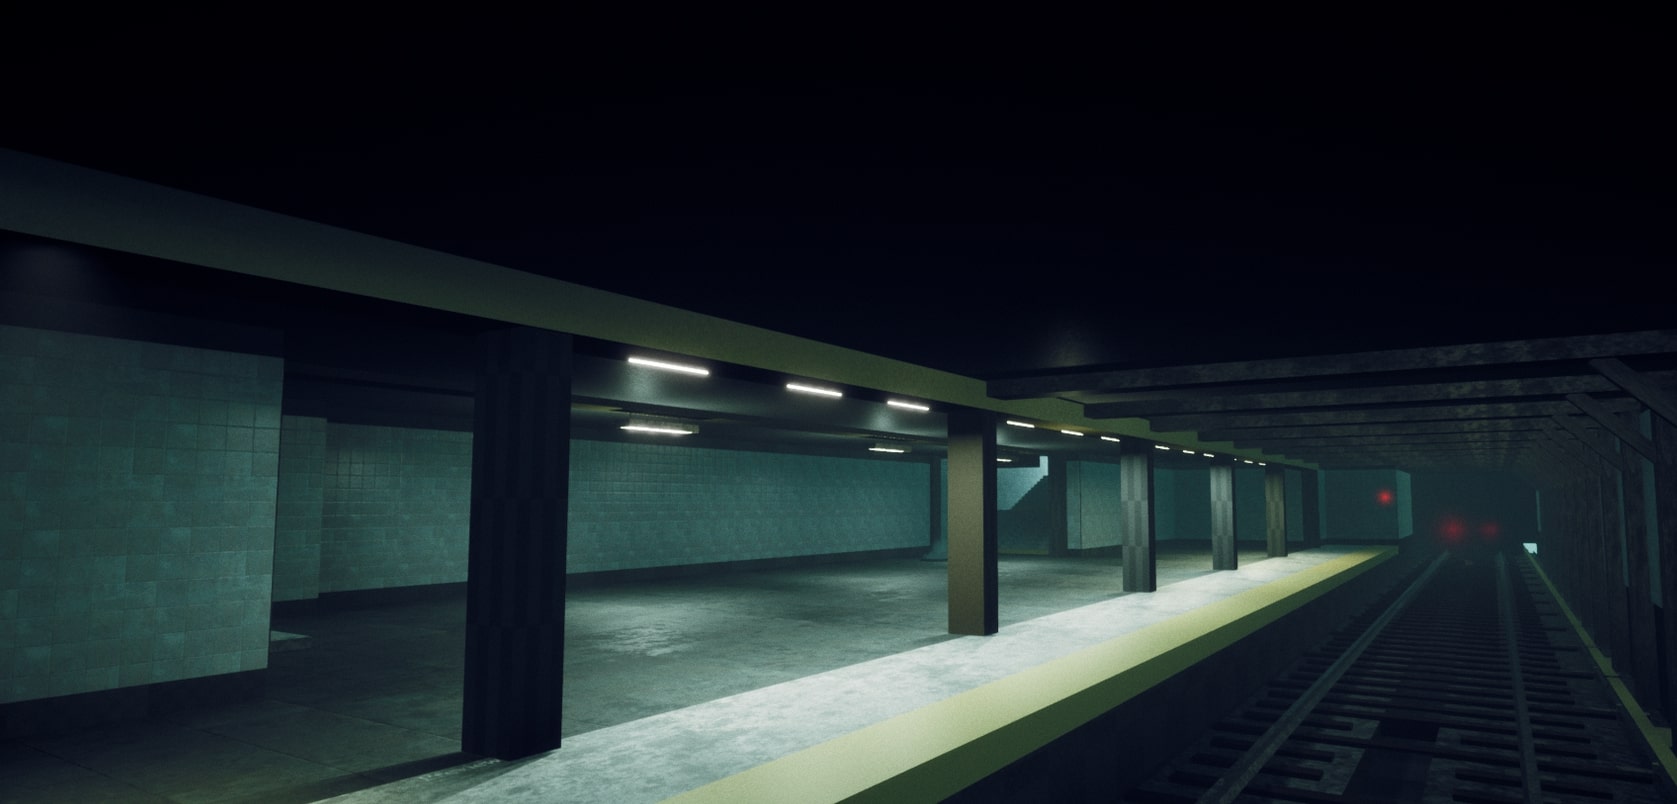 Remaking a Scene from Max Payne in UE4